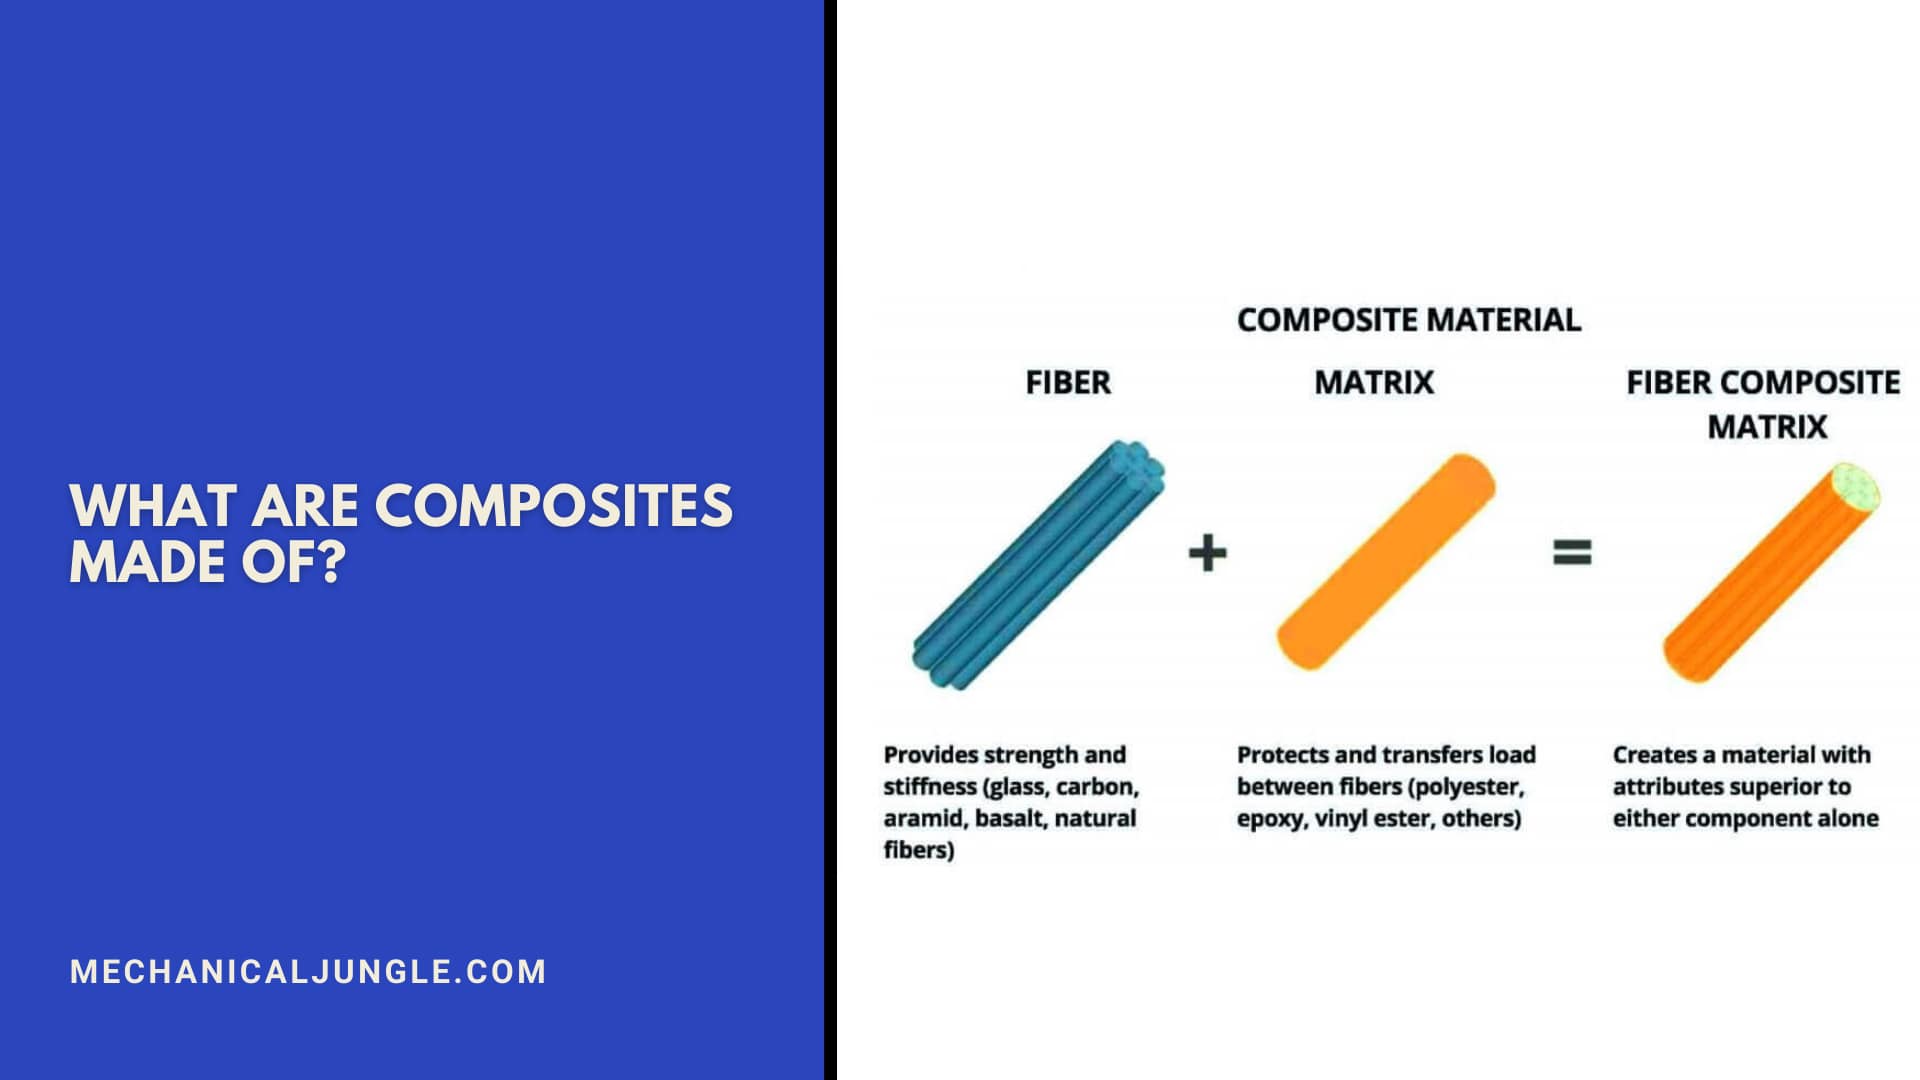 What Are Composites Made Of?